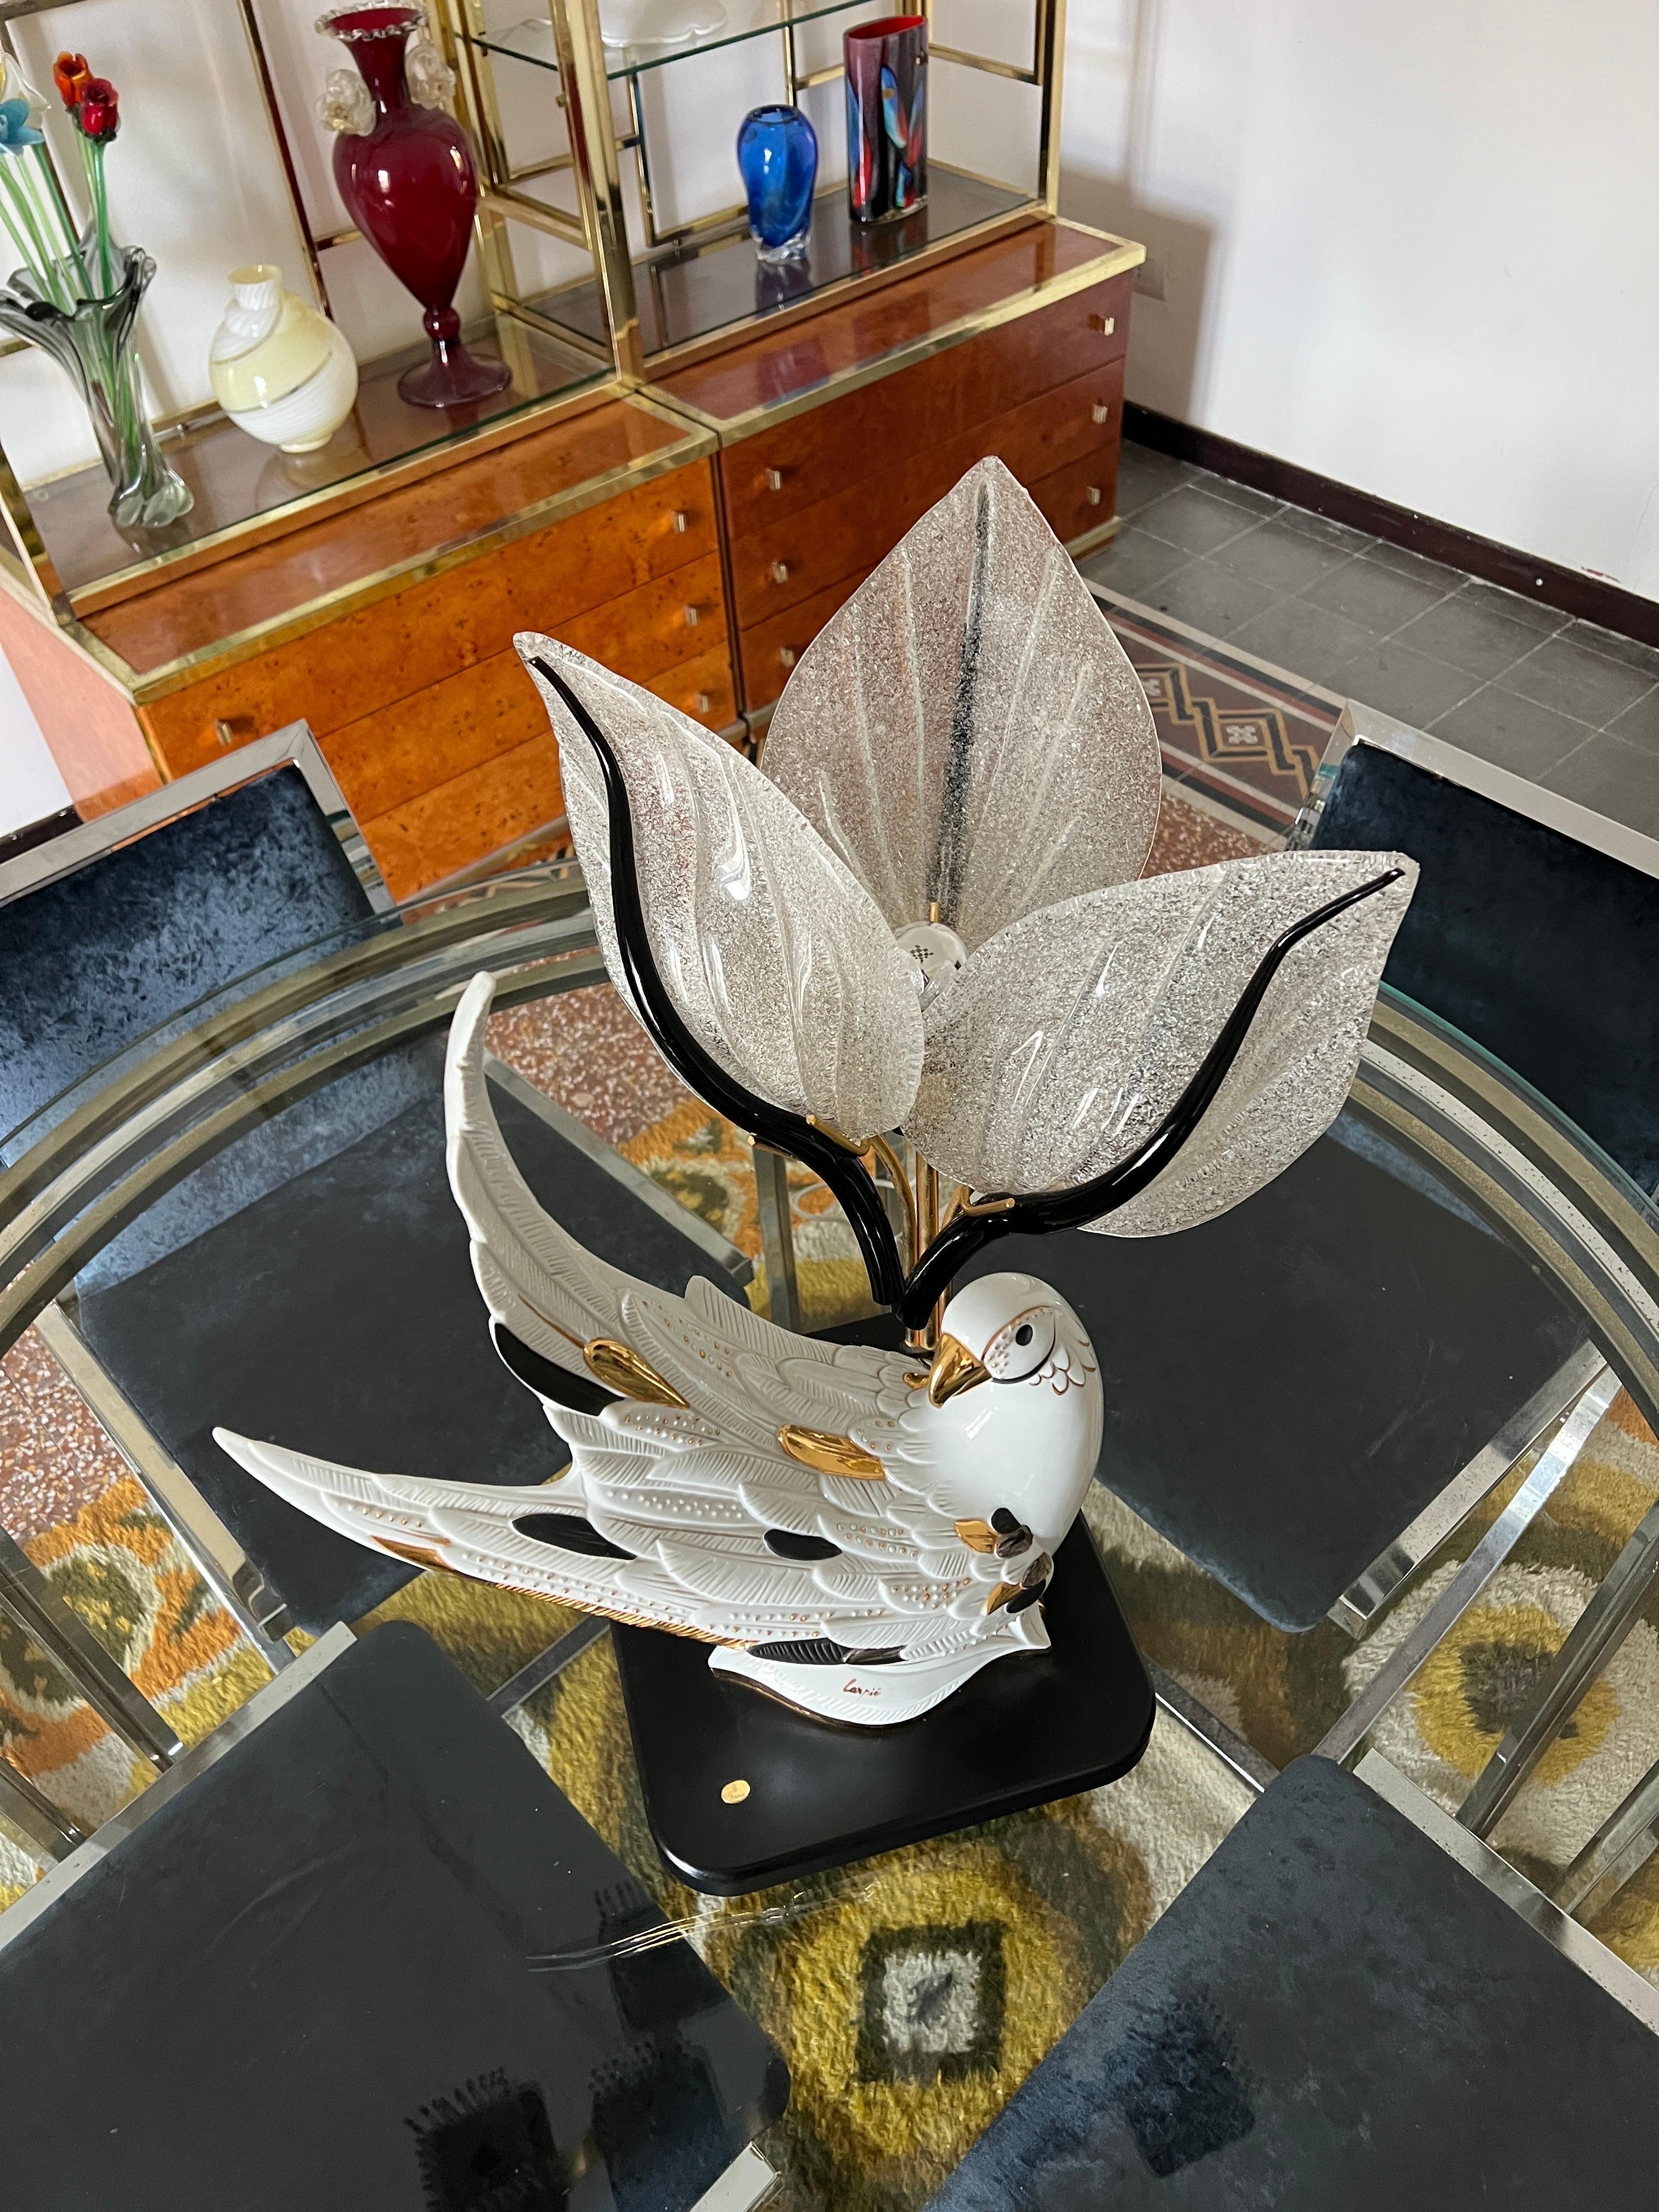 Behold our exquisite 1980s ceramic bird table light. This eye-catching piece features a stunning white ceramic bird adorned with intricate gold and black detailing. Three large Murano glass leaves surround the light socket, crafted using the